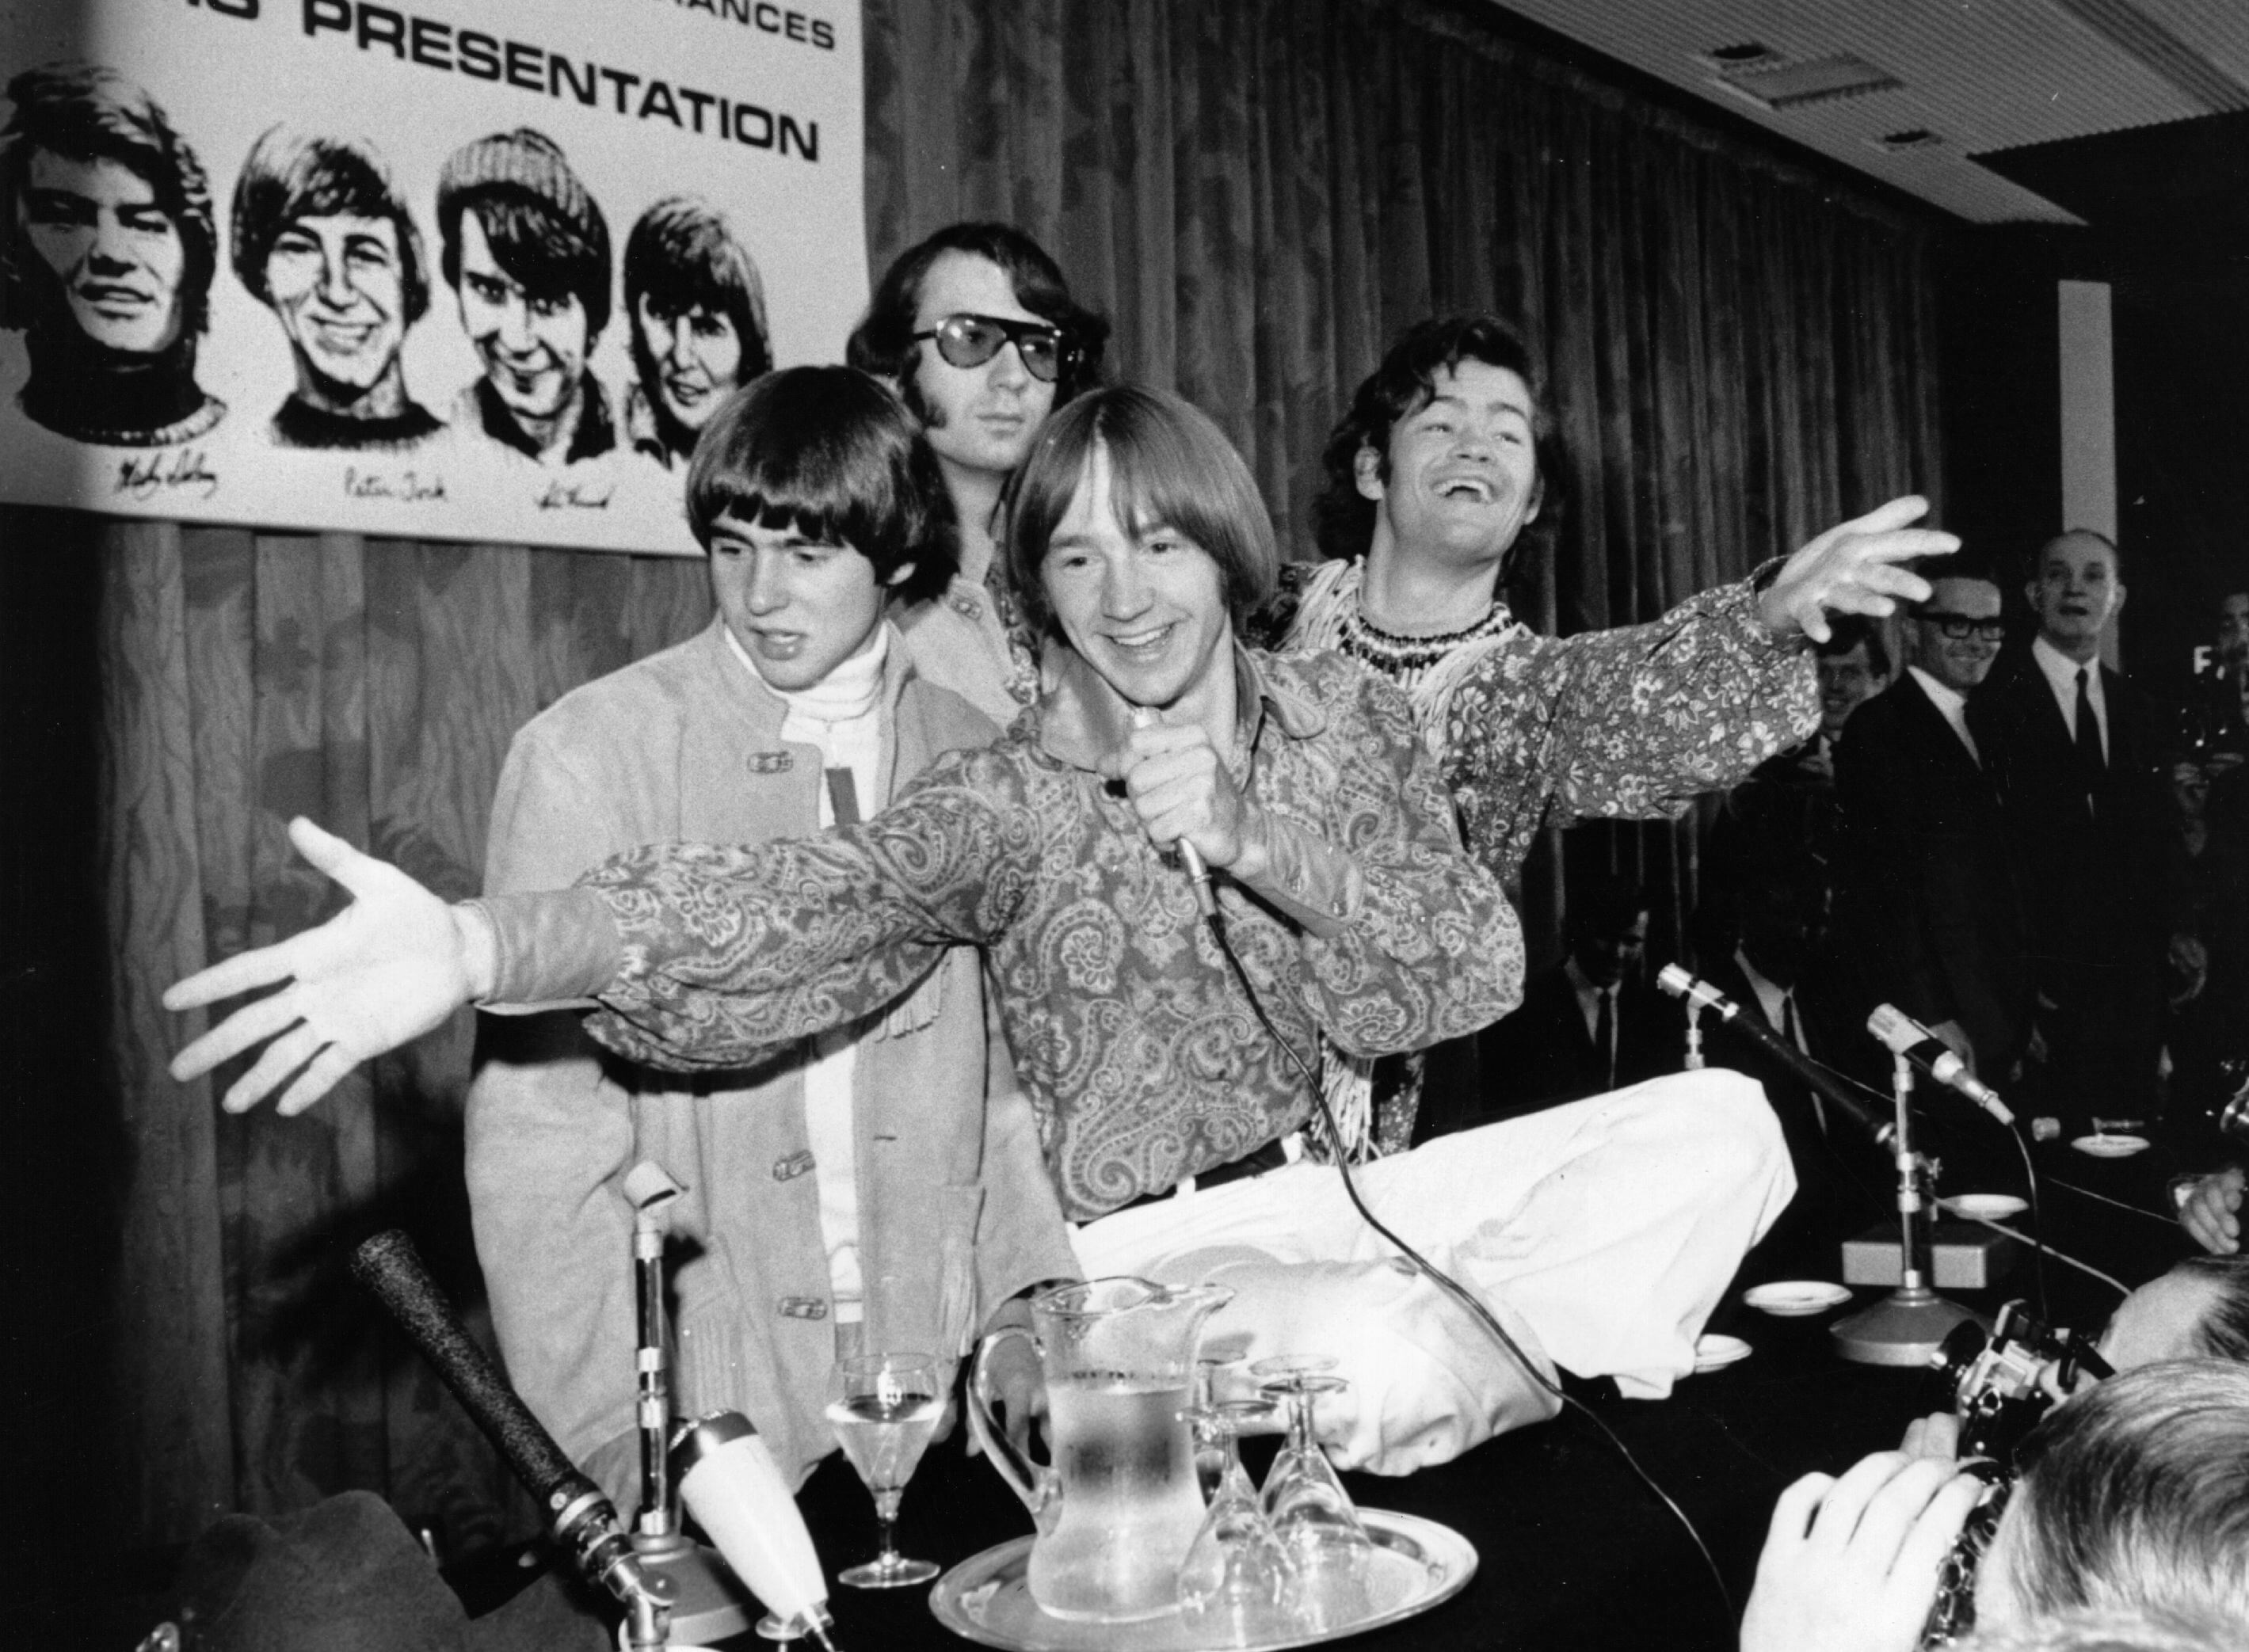 All The Monkees members near a poster